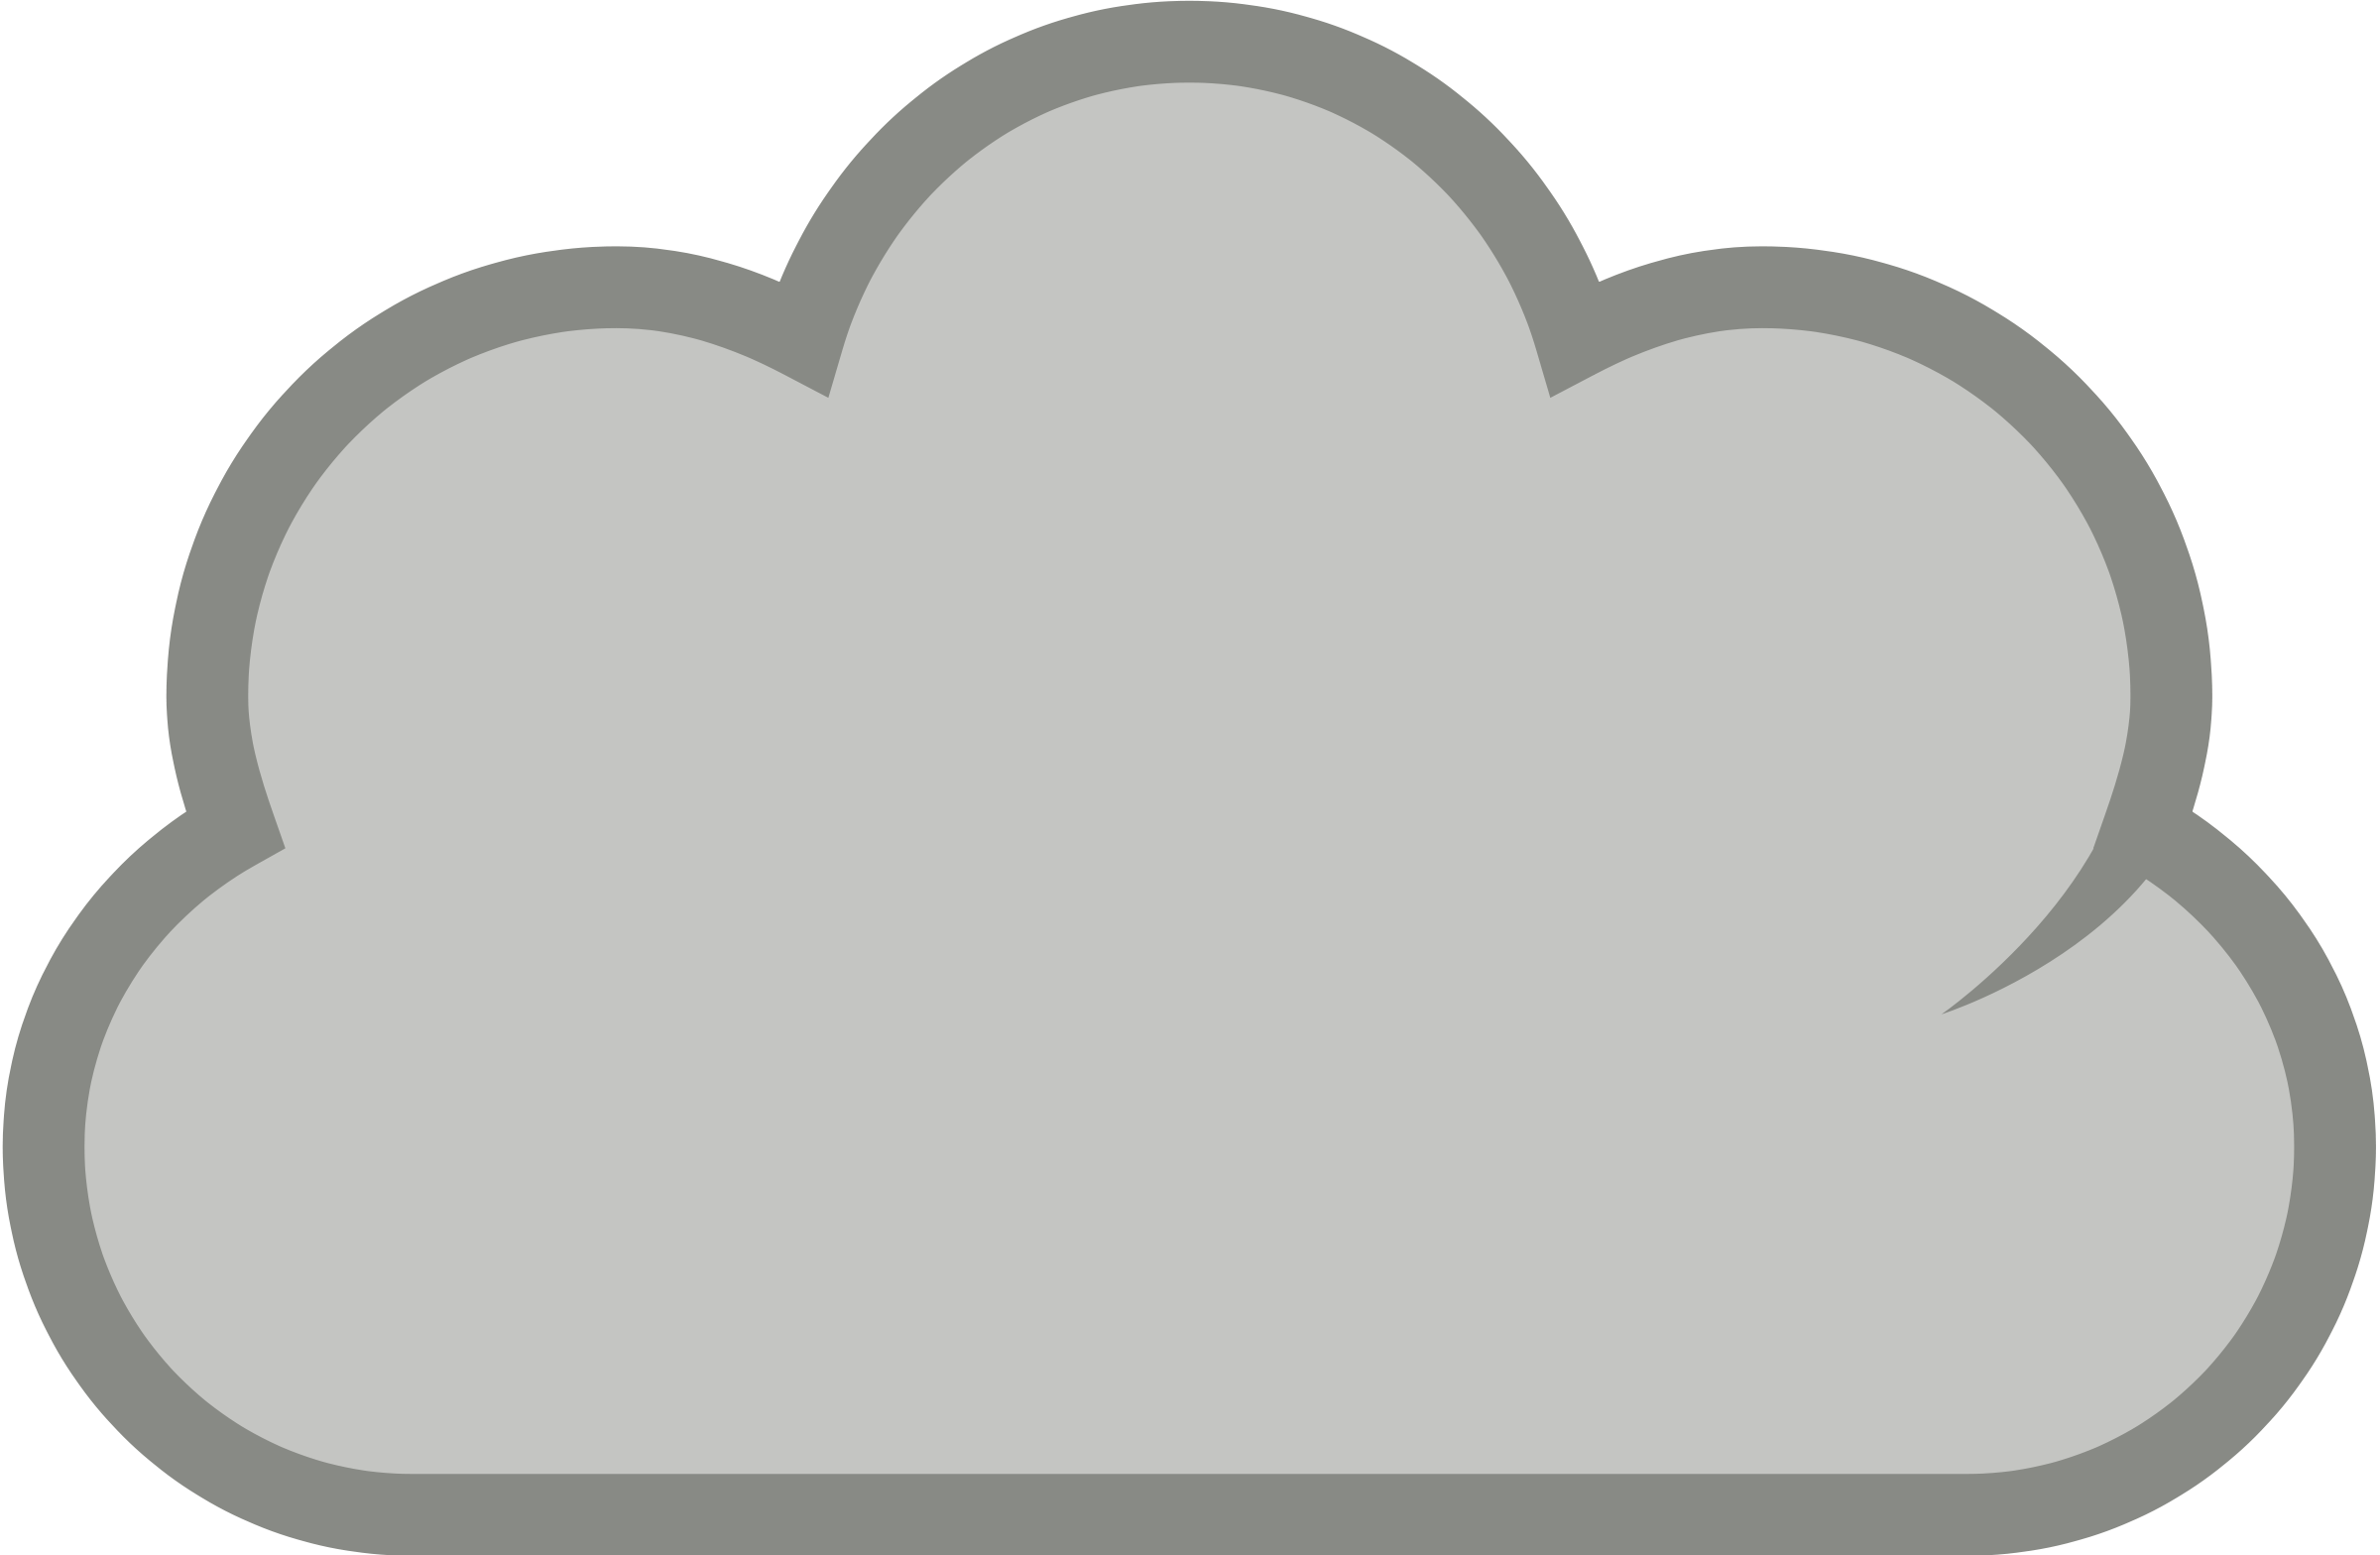 Cloud clip art outline. Windy clipart stormy day